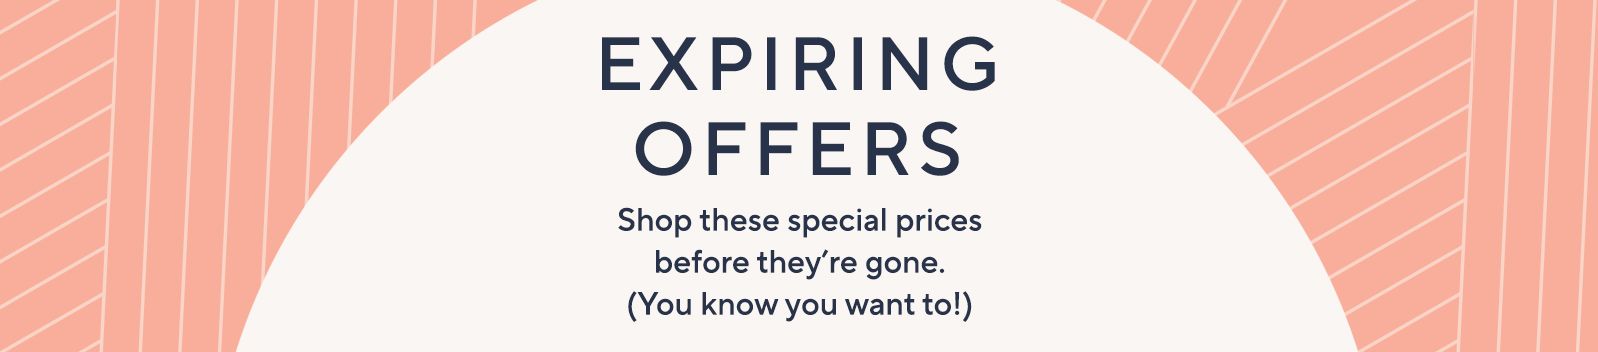 Expiring Offers. Shop these special prices before they're gone. (You know you want to!)